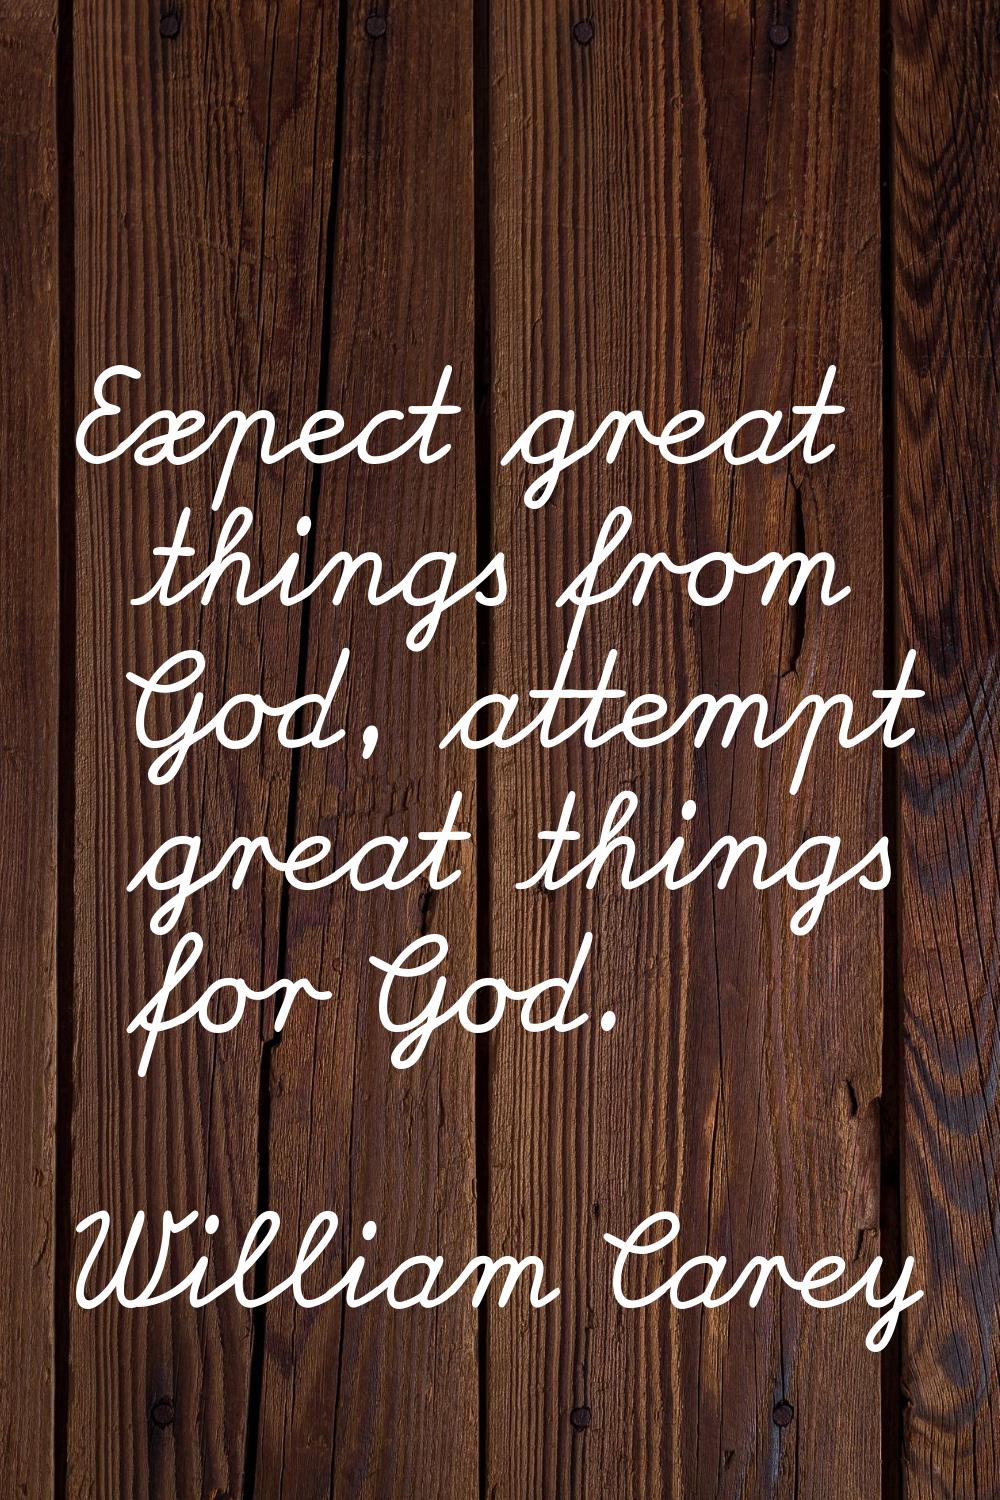 Expect great things from God, attempt great things for God.